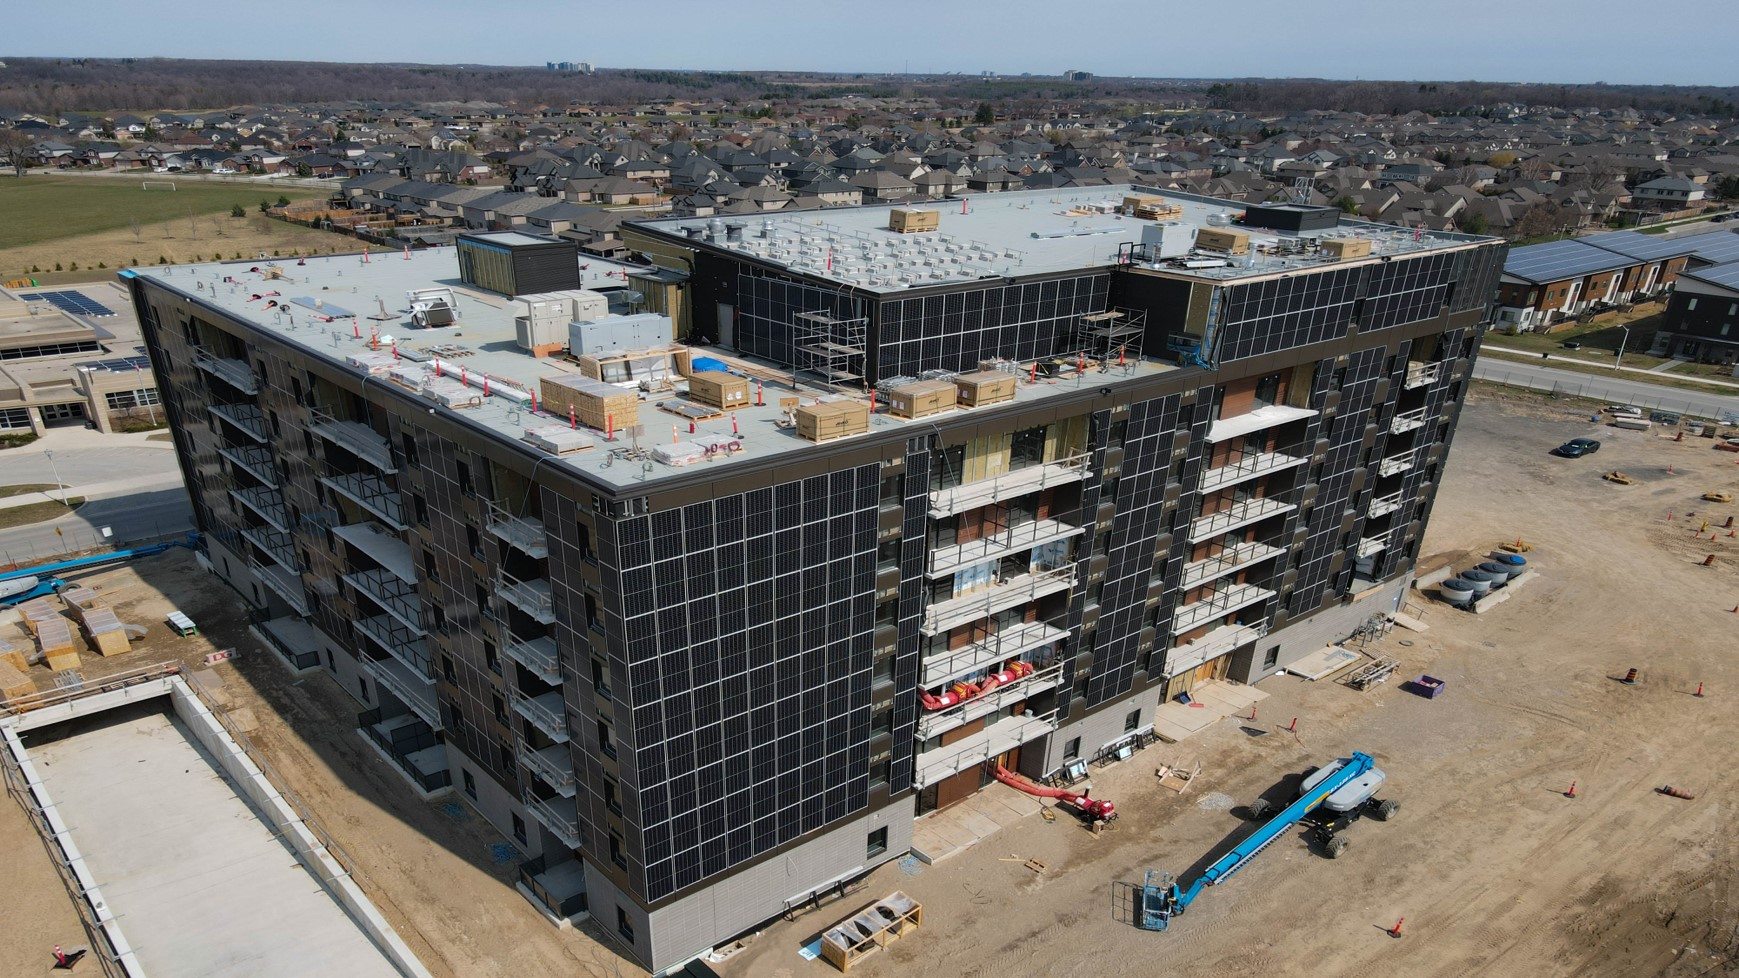 An aerial photograph of a parking garage with solar PV installed on the building façade. Additionally, more than 120kW of PV will be added to the roof during the Summer of 2021. The adjacent Building 16 will soon be constructed with similar PV capacity.